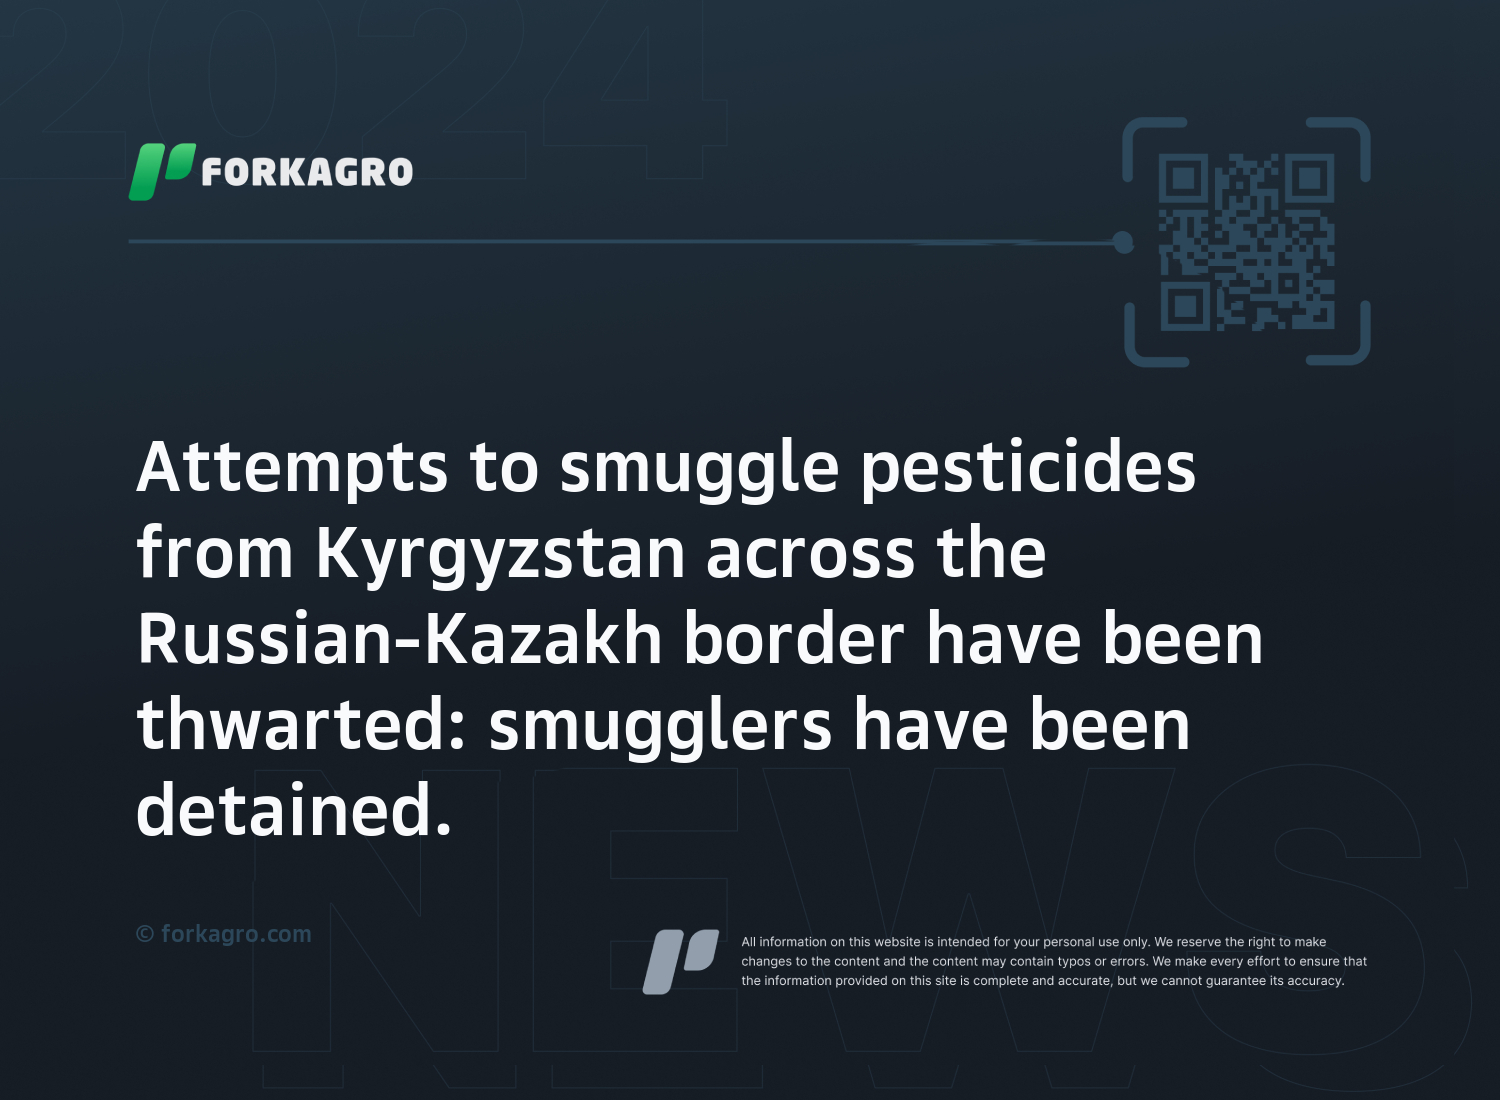 Attempts to smuggle pesticides from Kyrgyzstan across the Russian-Kazakh border have been thwarted: smugglers have been detained.